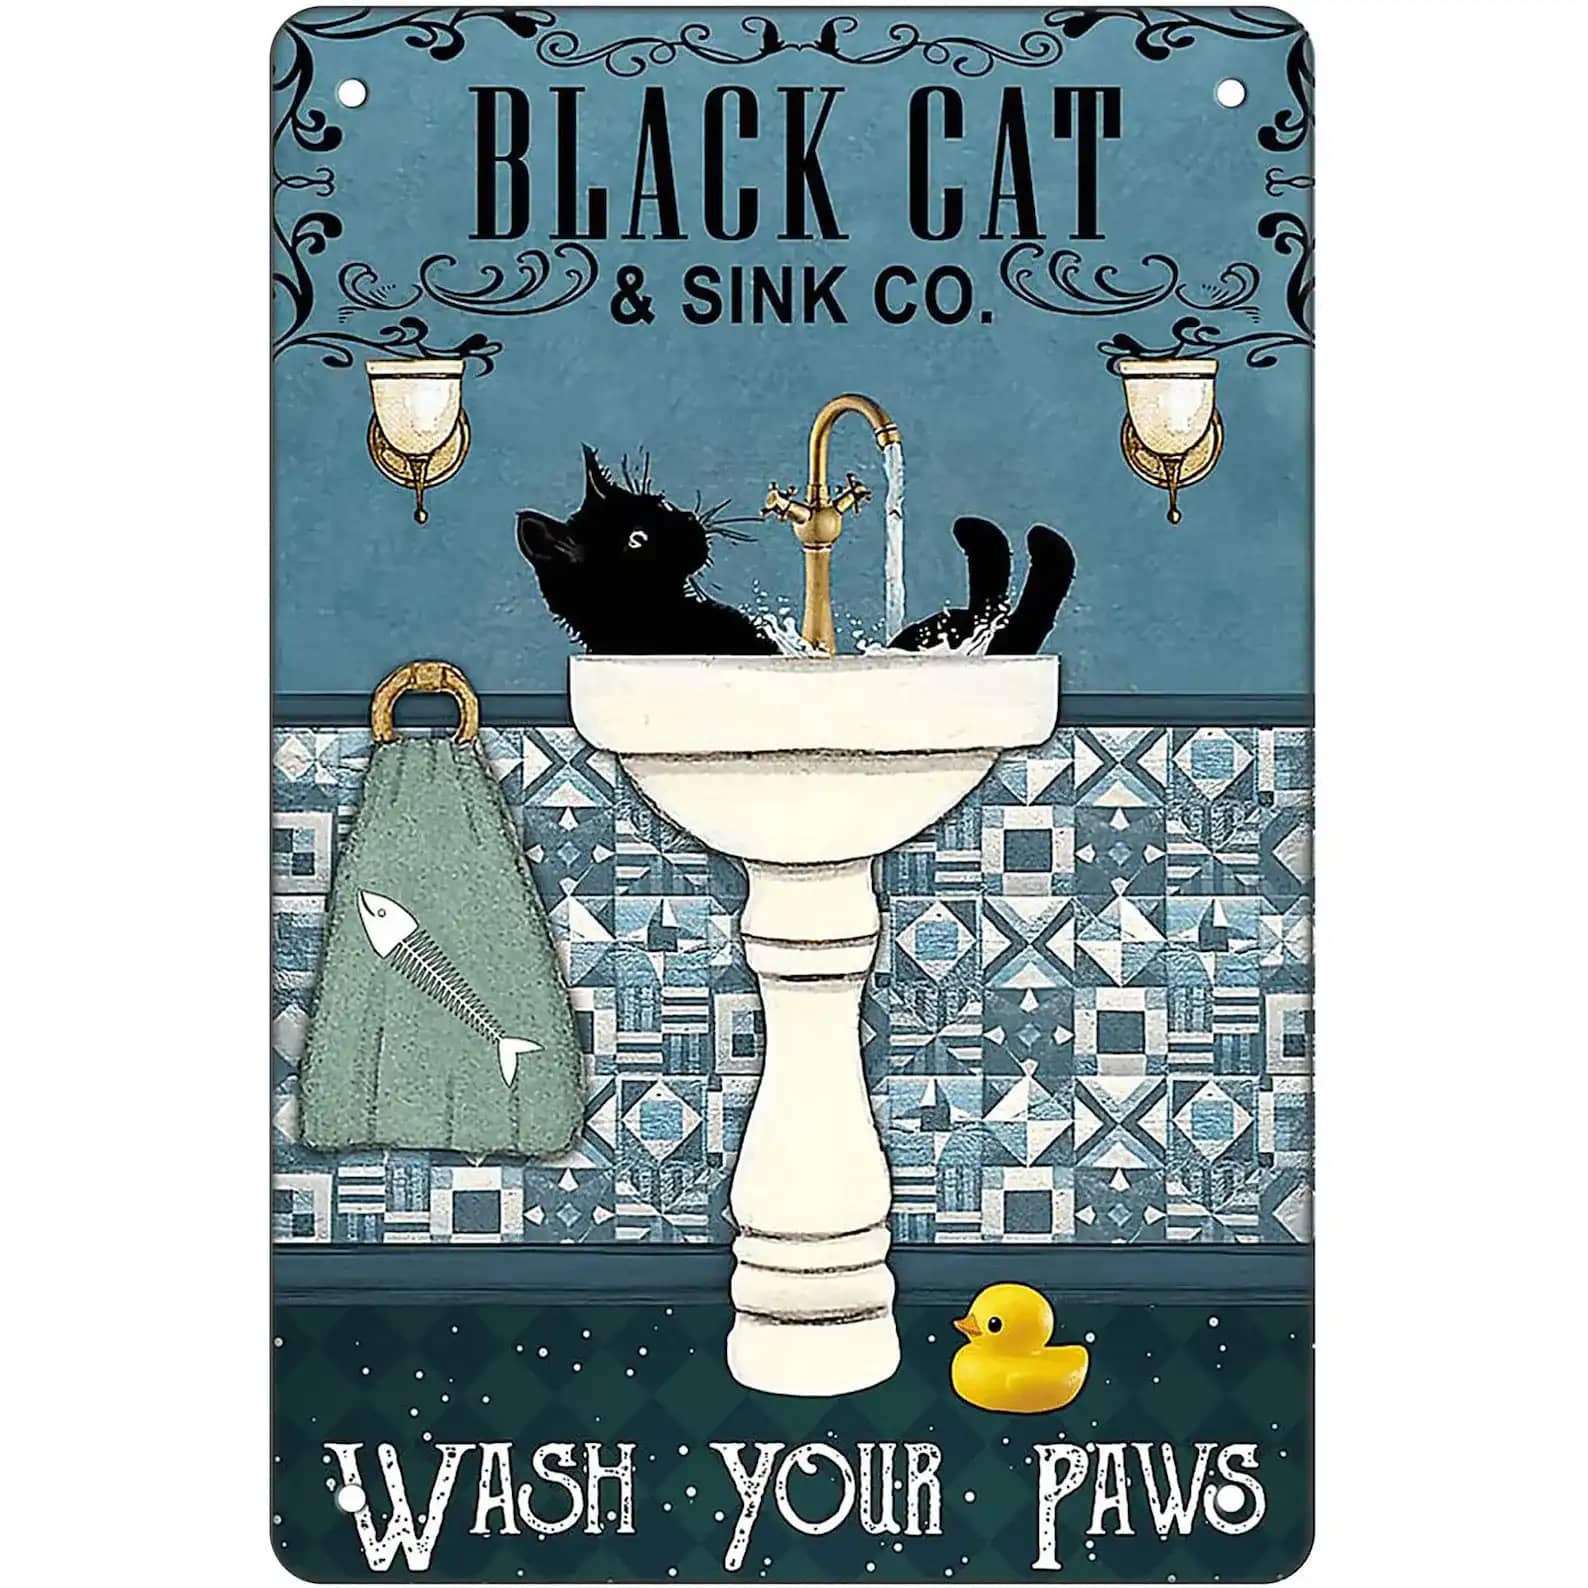 Funny Bathroom Retro Black Cat Decor Gifts For Cat Lovers Metal Sign